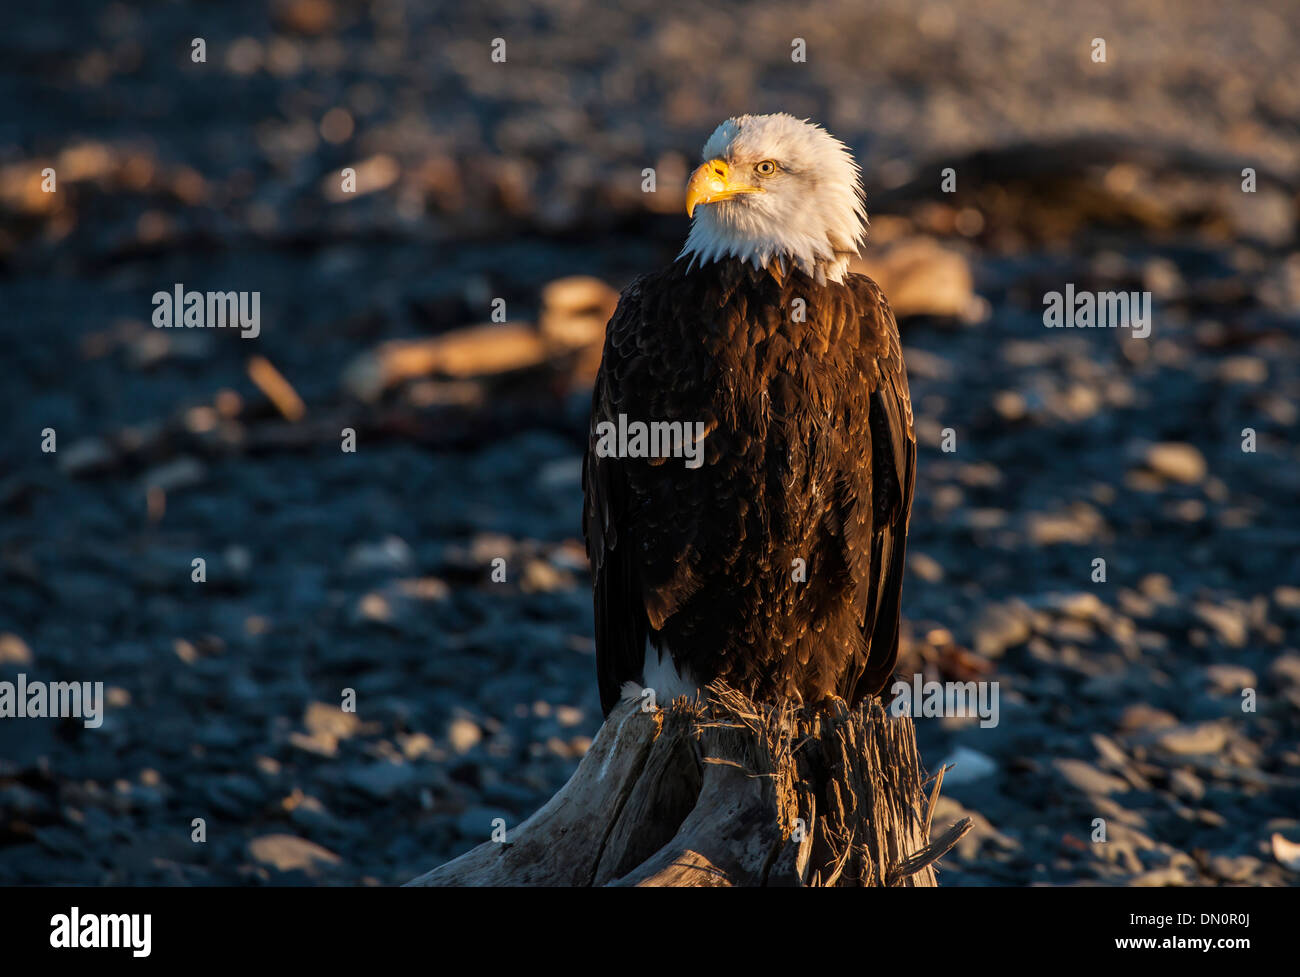 Close up of a Bald Eagle sitting on driftwood on an Alaskan beach in warm evening light. Stock Photo